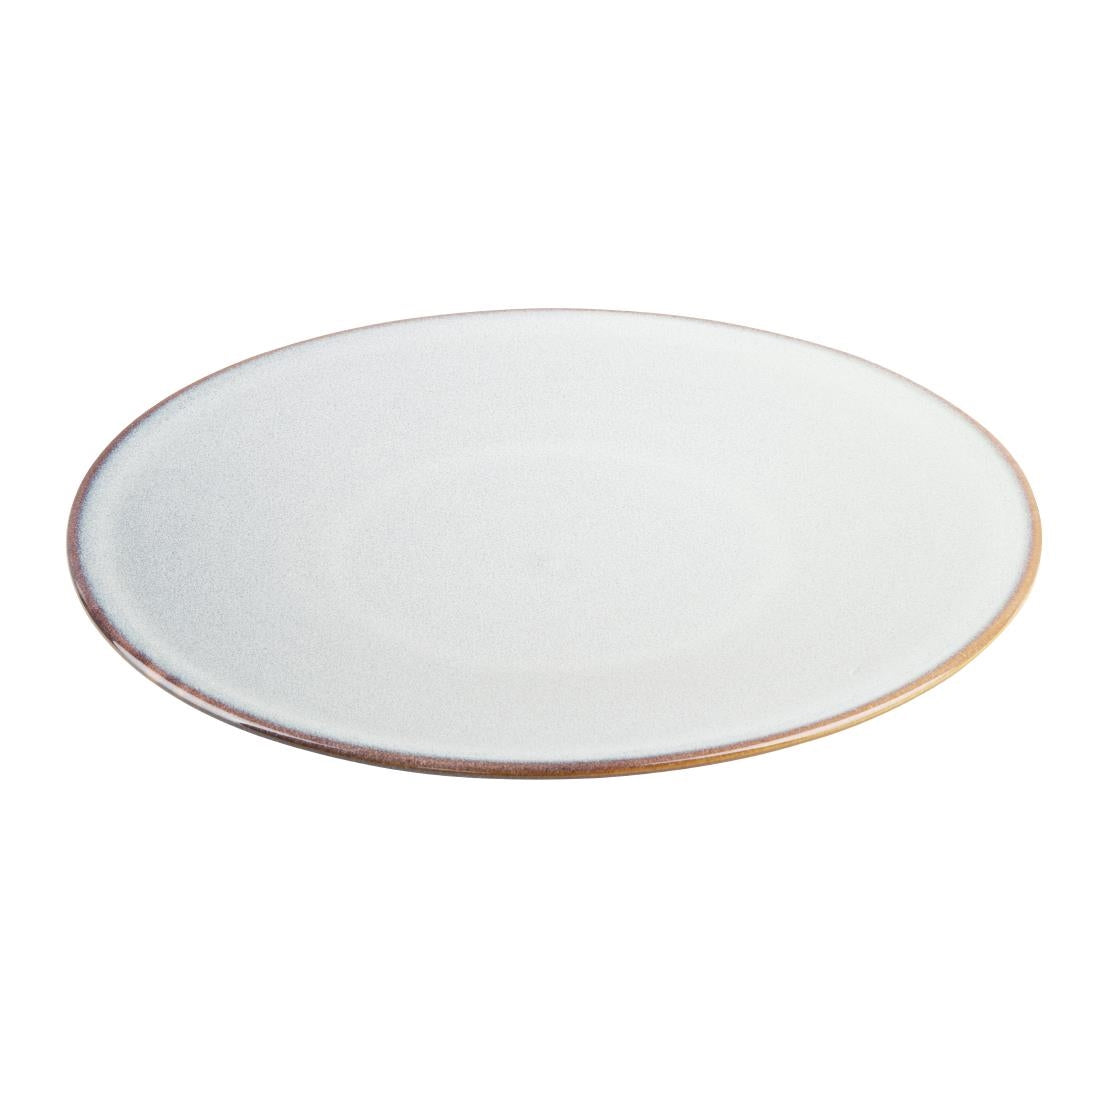 FU187 Olympia Drift Grey Plain Coupe Plate 280mm (Pack of 4)